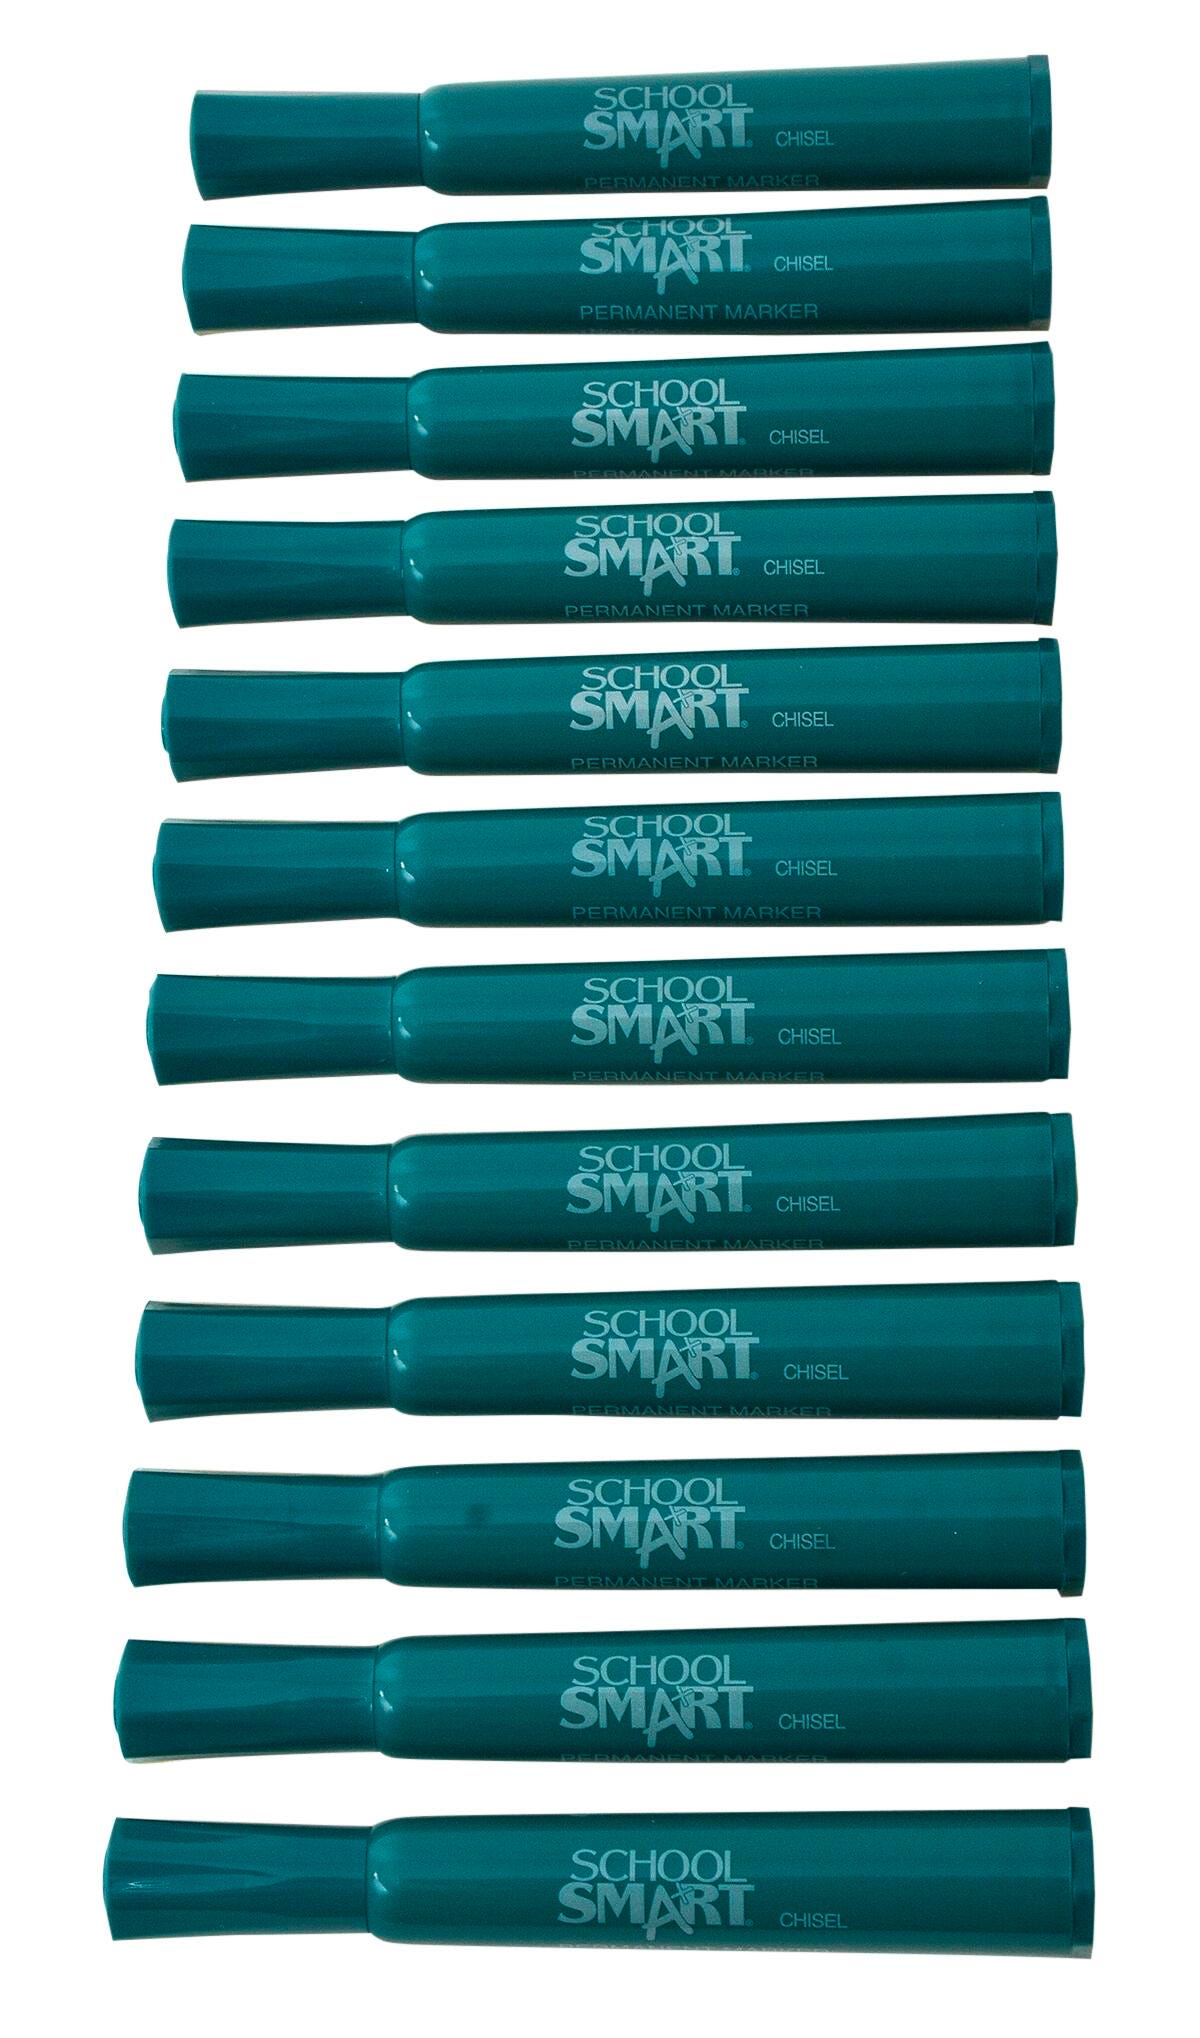 School Smart Non-Toxic Permanent Markers, Broad Chisel Tip, Green, Pack of 12 - image 3 of 4